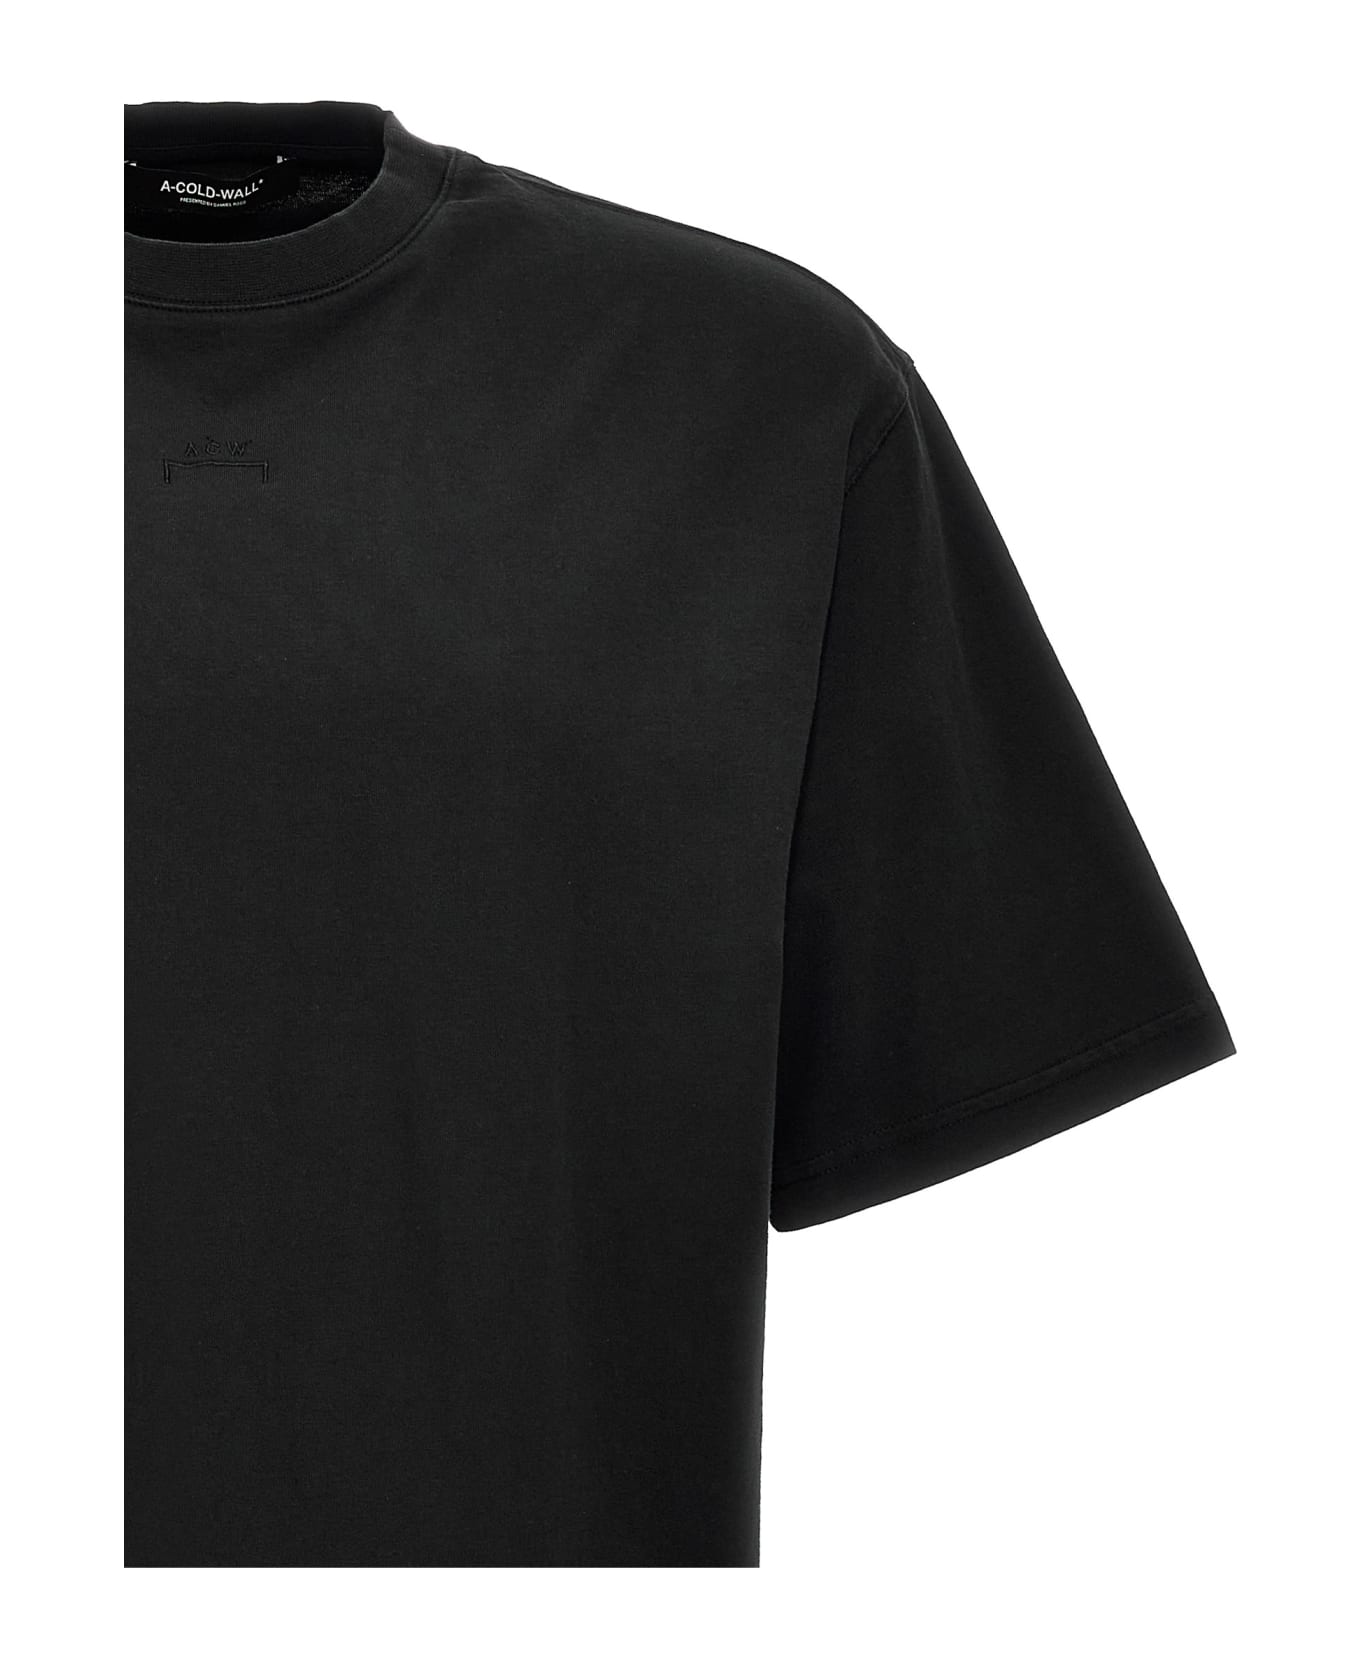 A-COLD-WALL 'essential' T-shirt - Black   シャツ